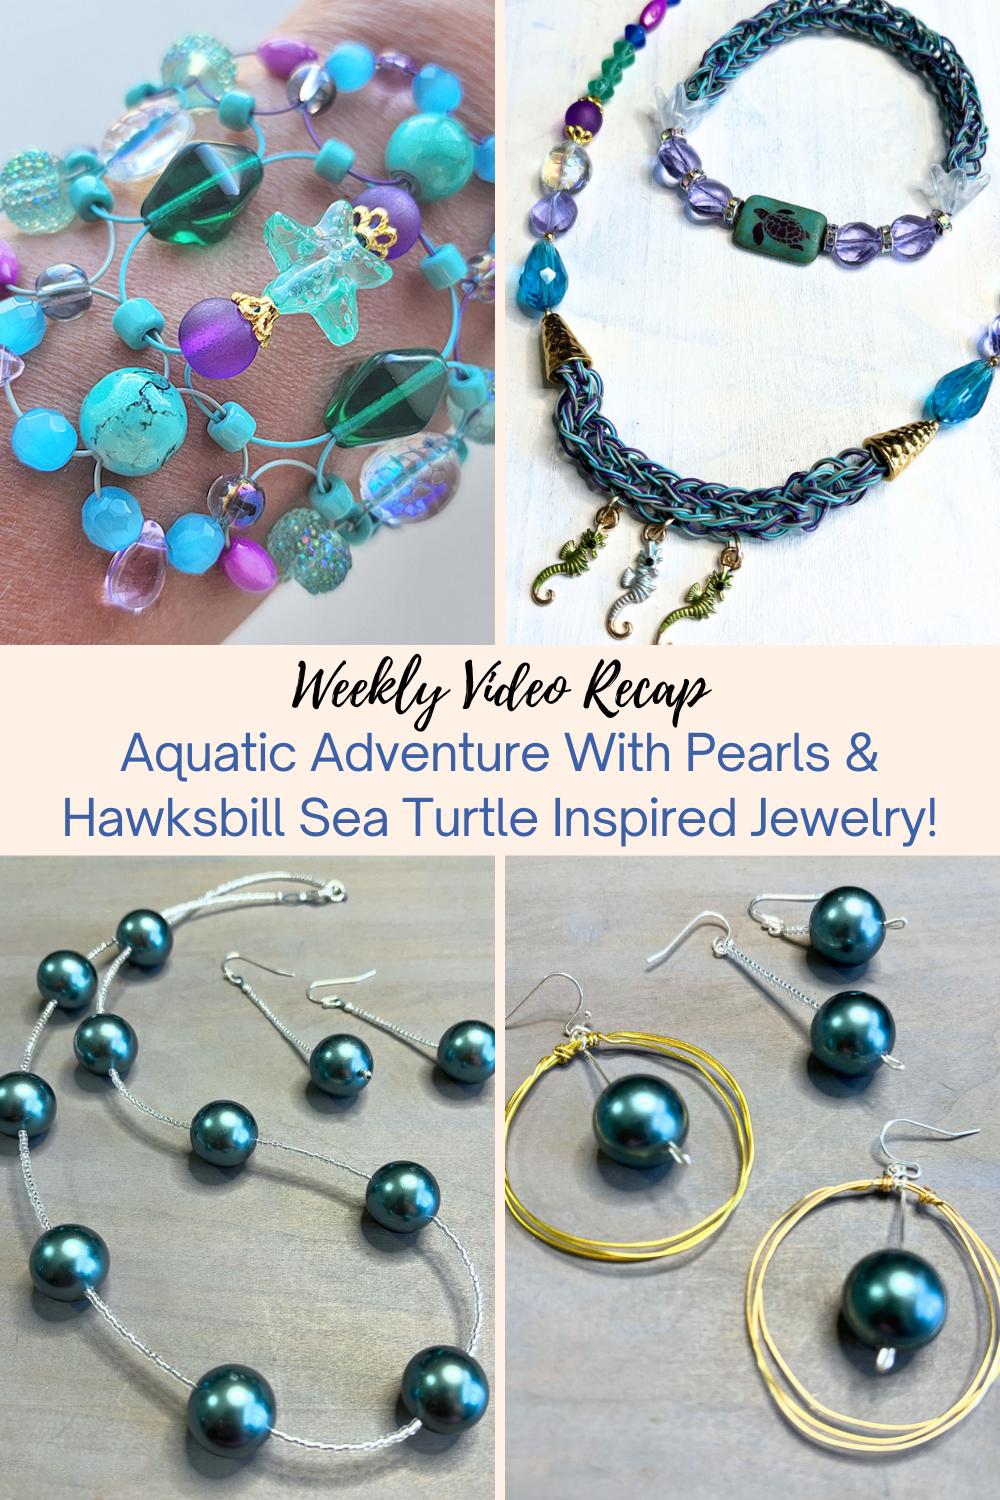 Aquatic Adventure With Pearls & Hawksbill Sea Turtle Inspired Jewelry! Collage